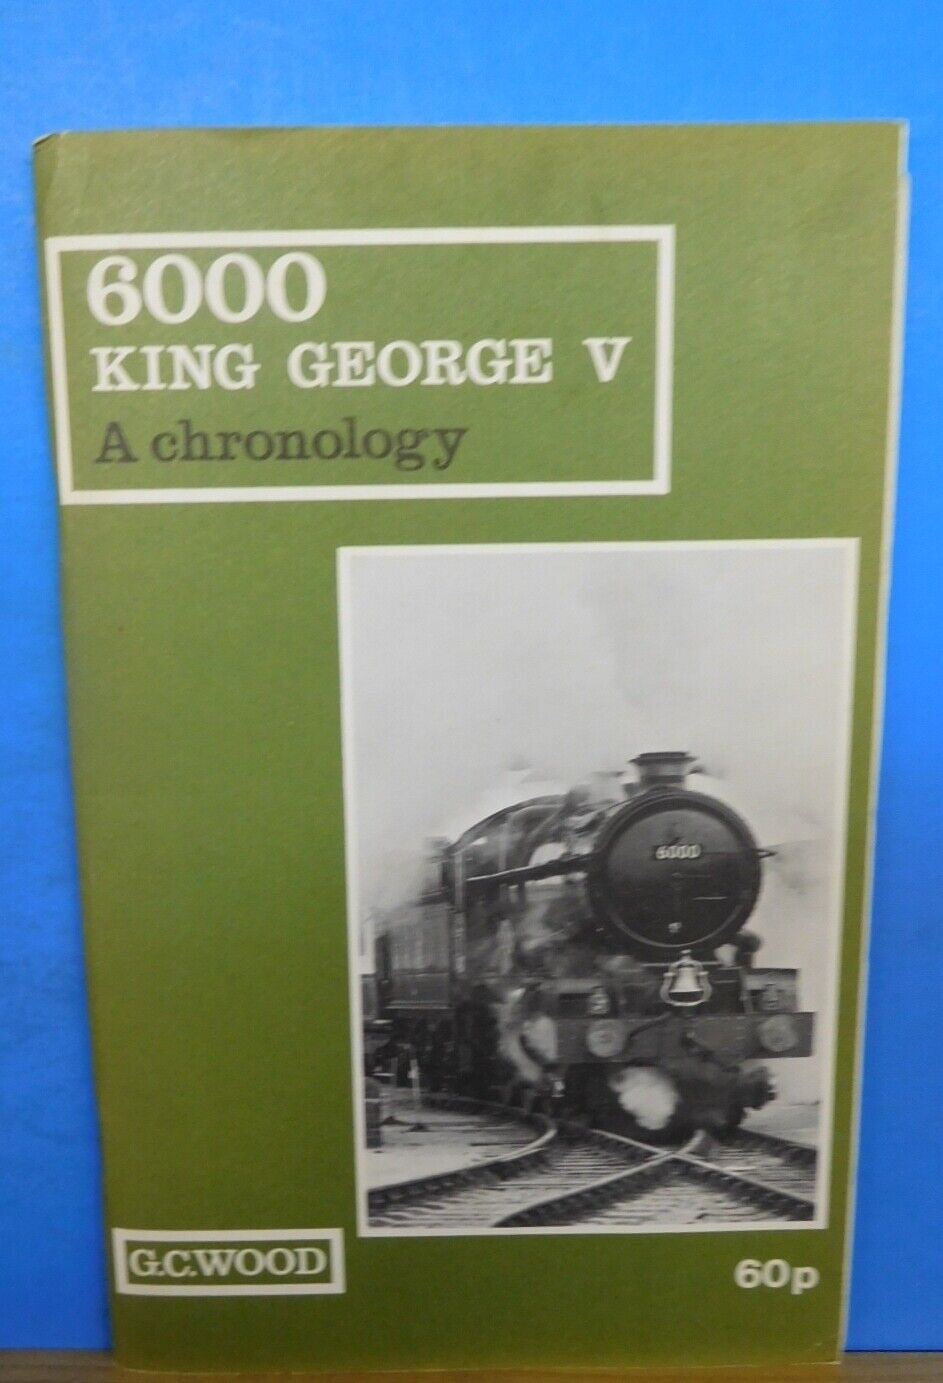 6000 King George V - A Chronology by GC Wood 1972 72 pages.